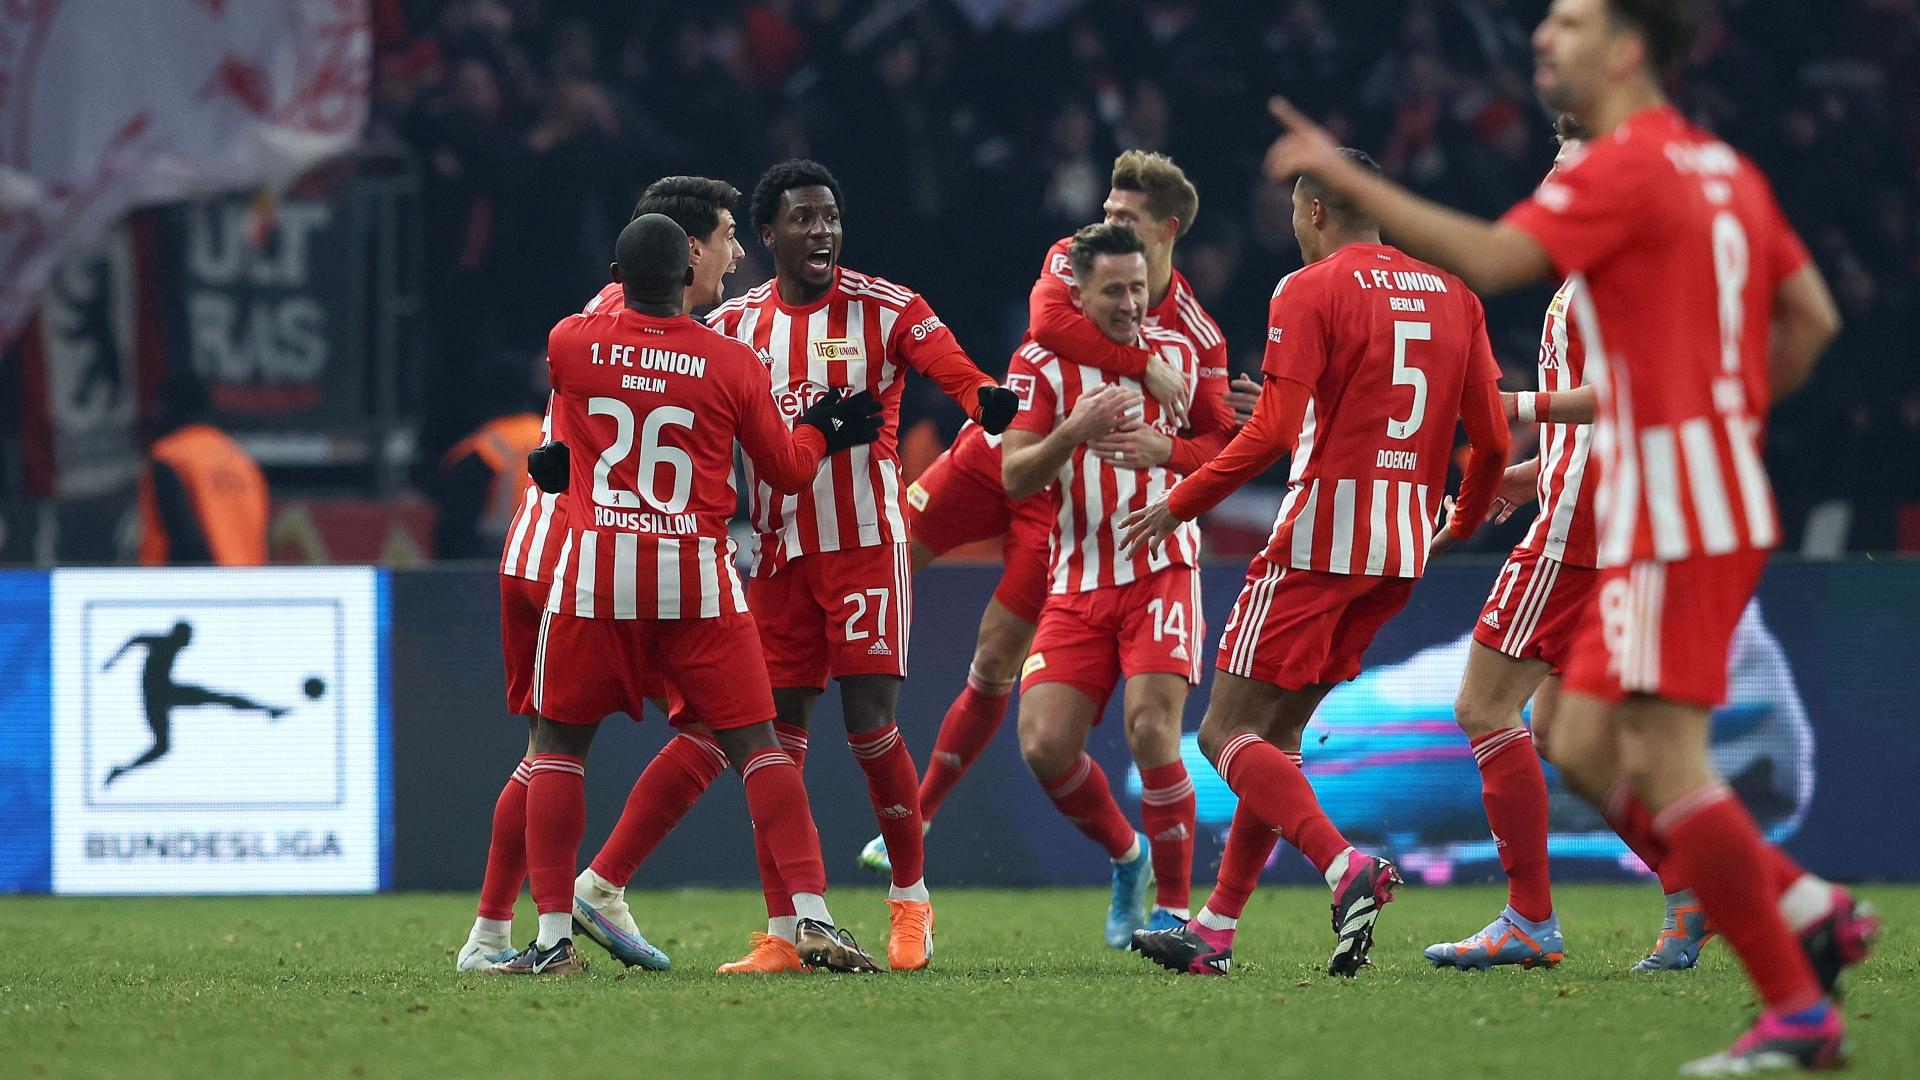 Union Berlin vs Cologne Live Stream Tips - Two Straight Home Wins for Union?